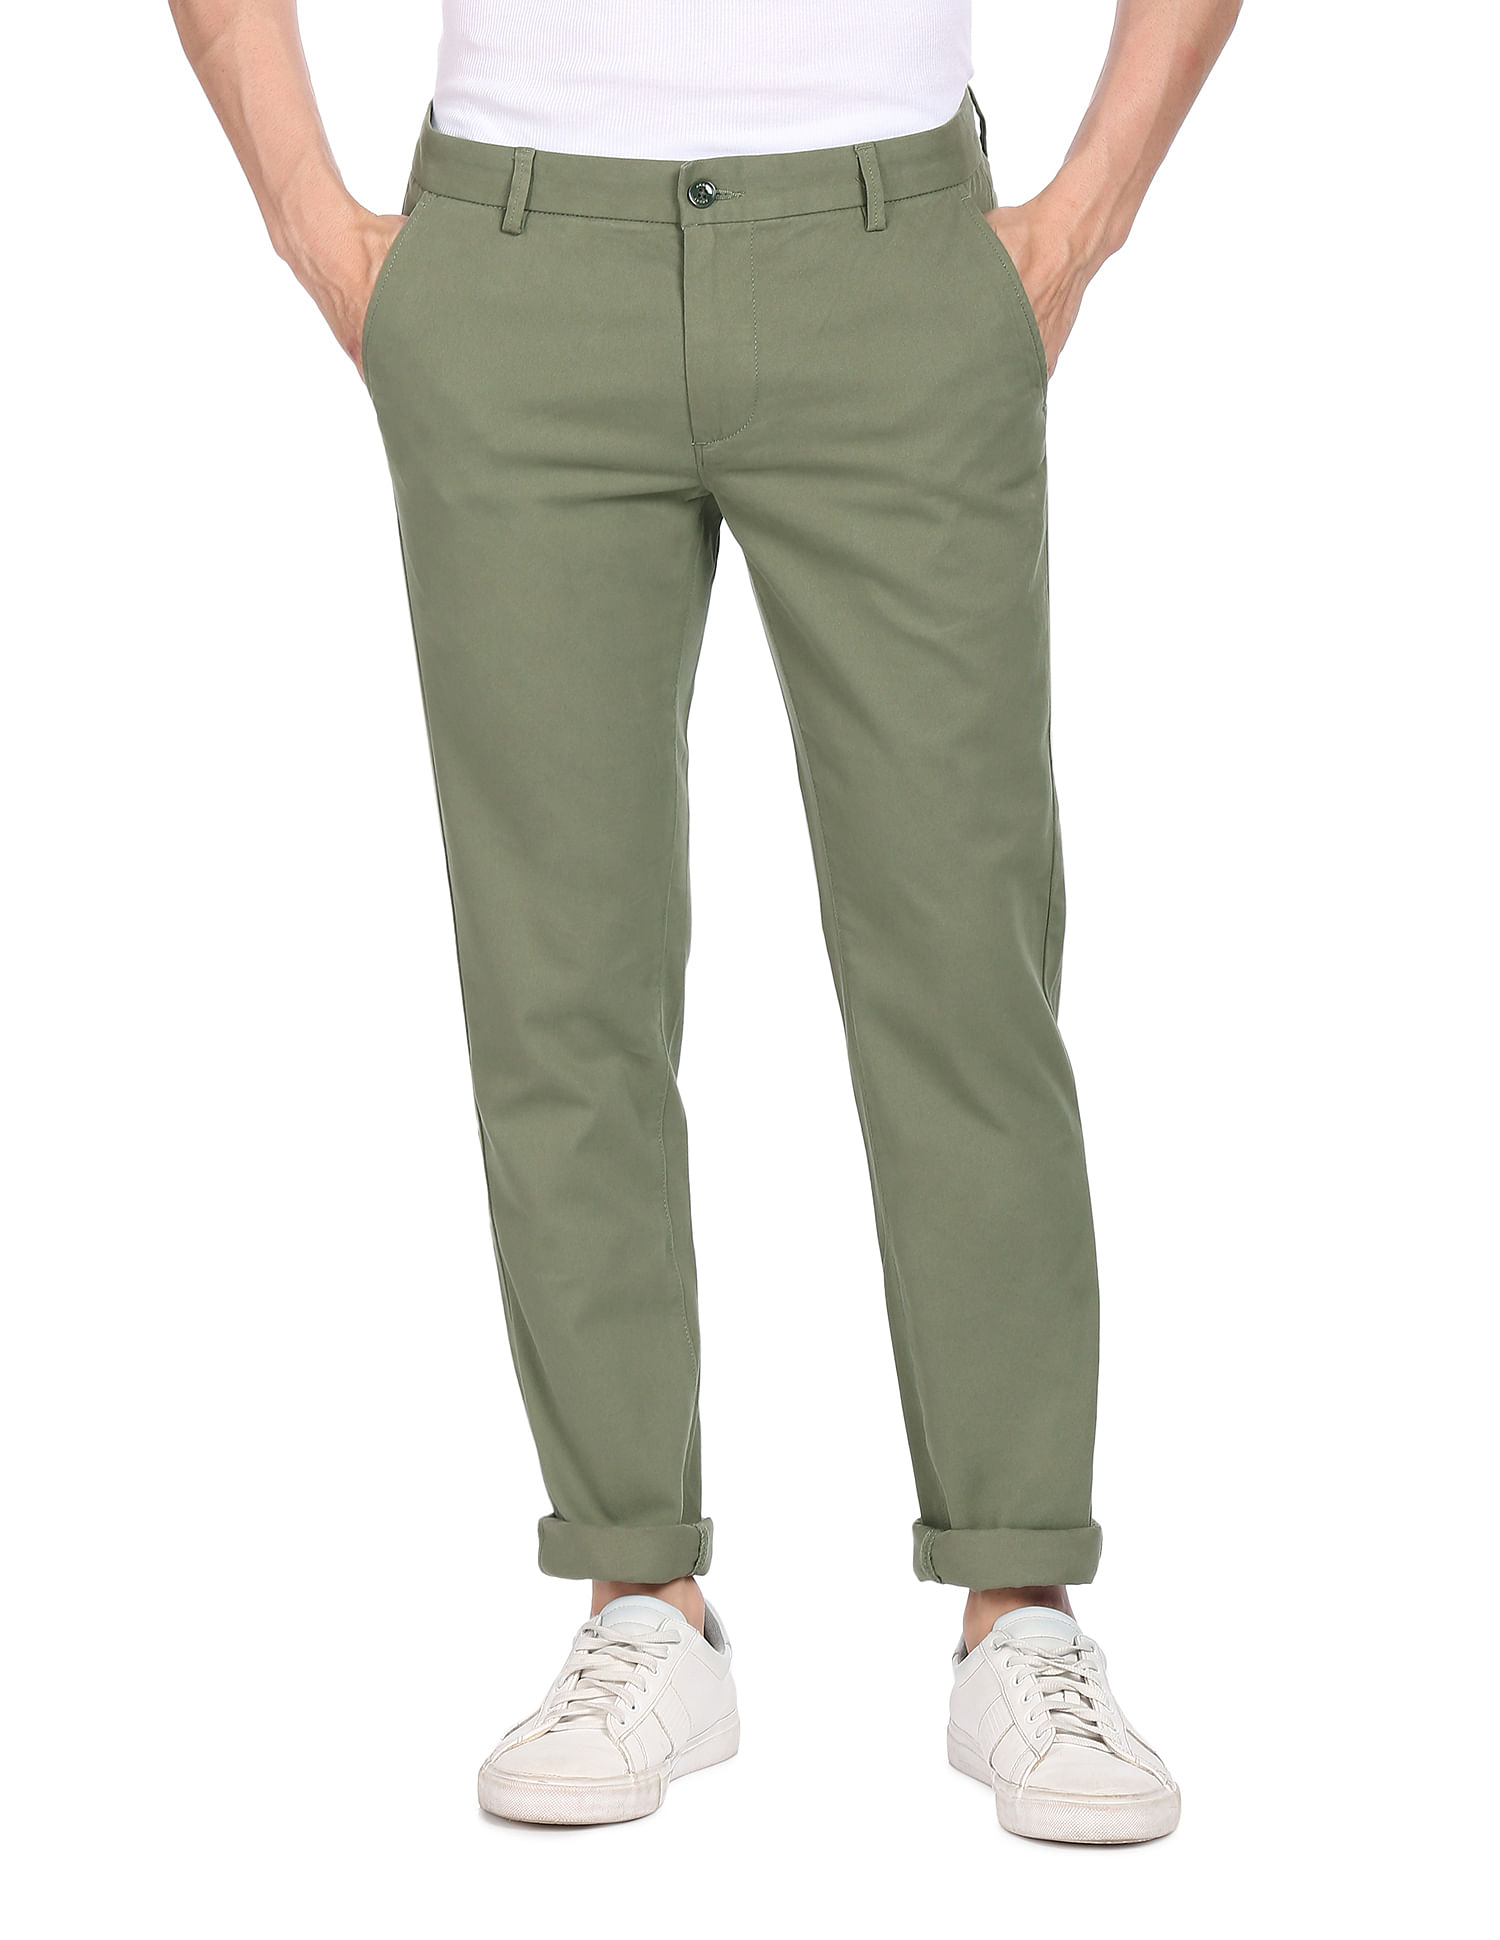 140 Olive Green Pants ideas  mens outfits olive green pants green pants